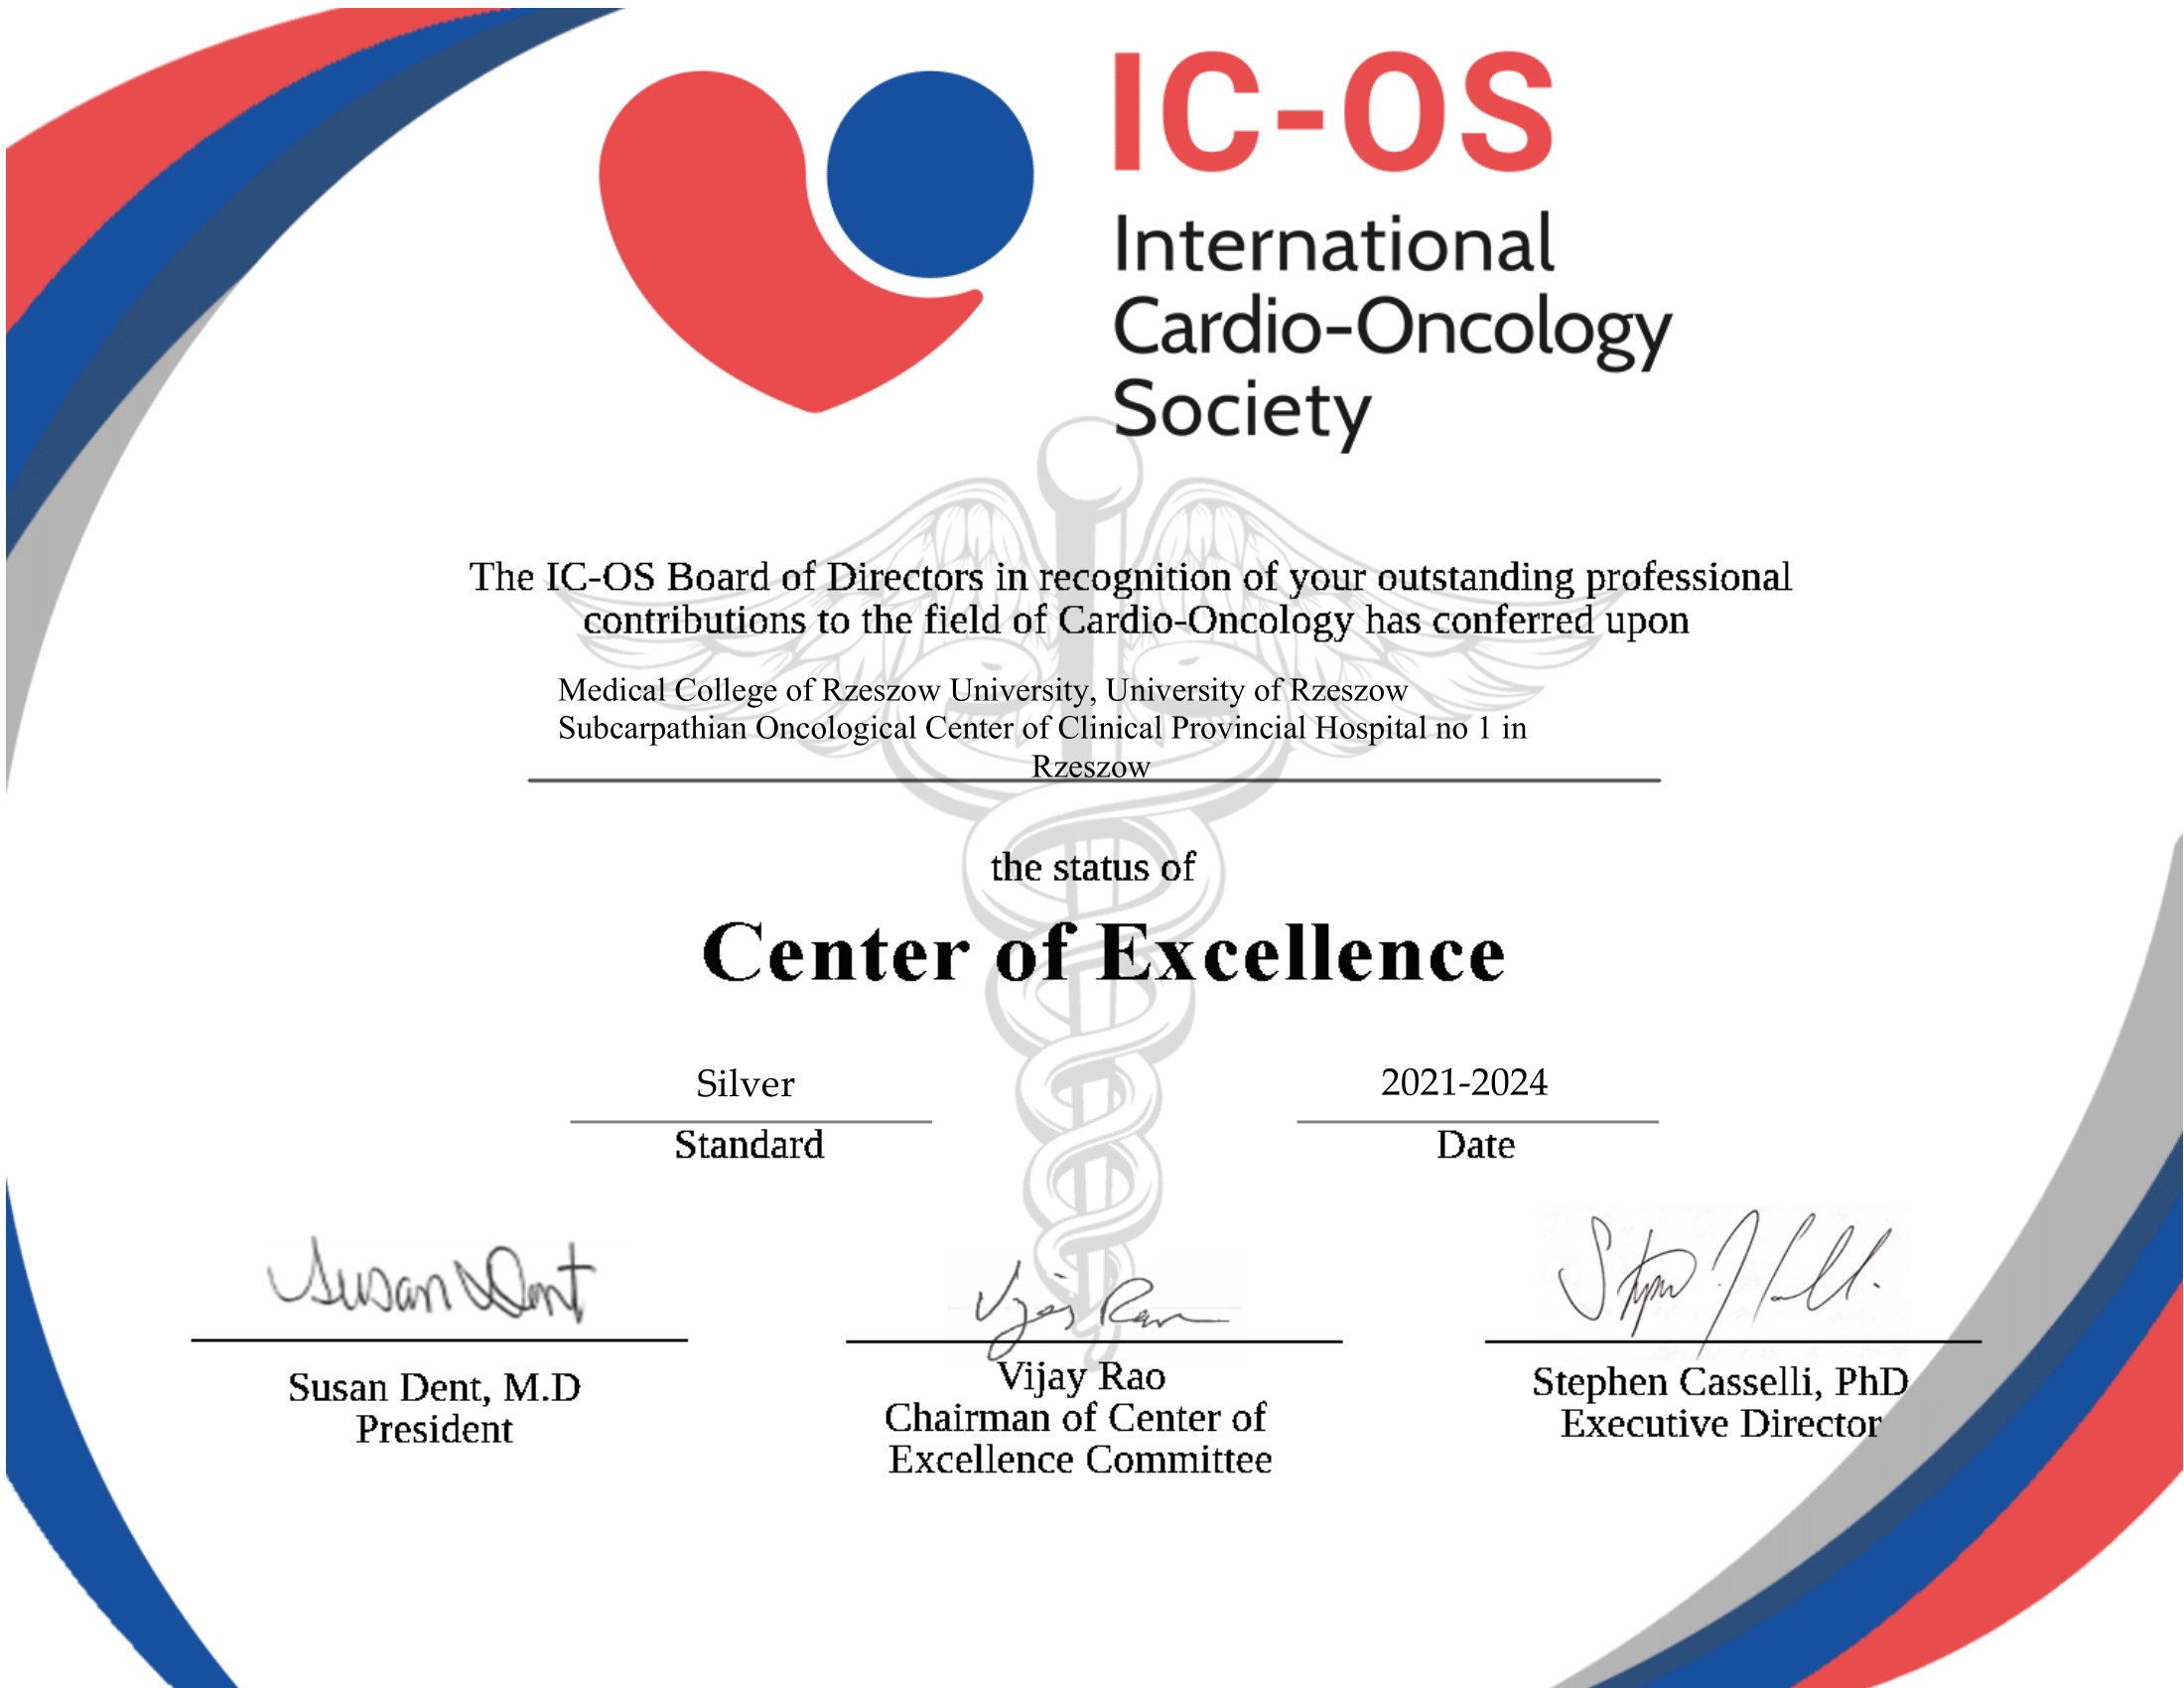 Rzeszow COE Certificate (1)-1.png [377.13 KB]